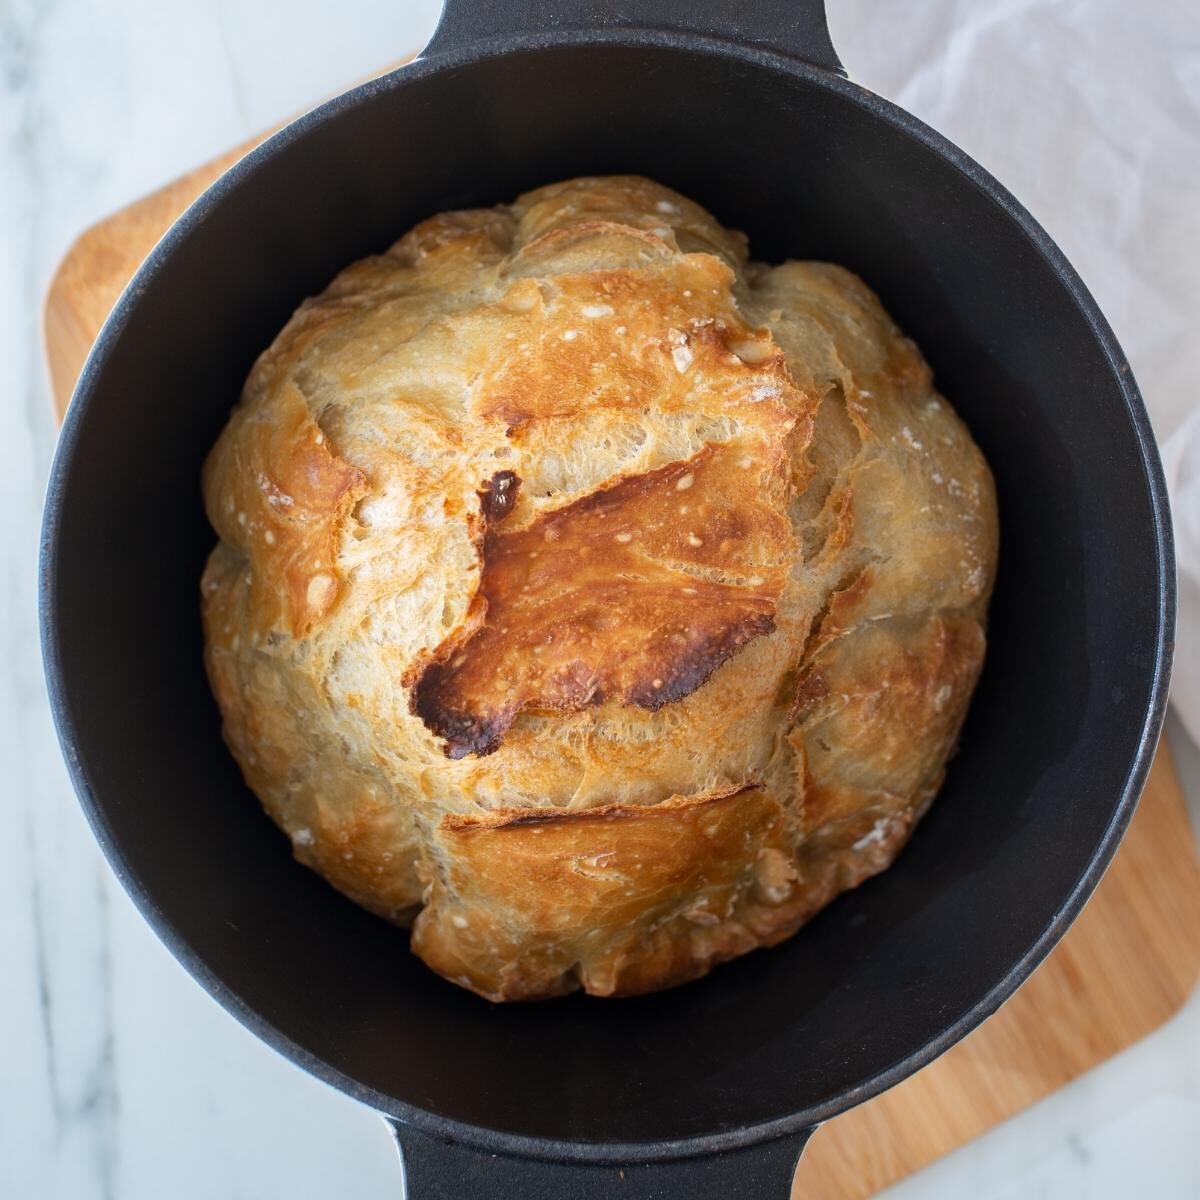 A round loaf of baked bread in a black cast iron Dutch oven.